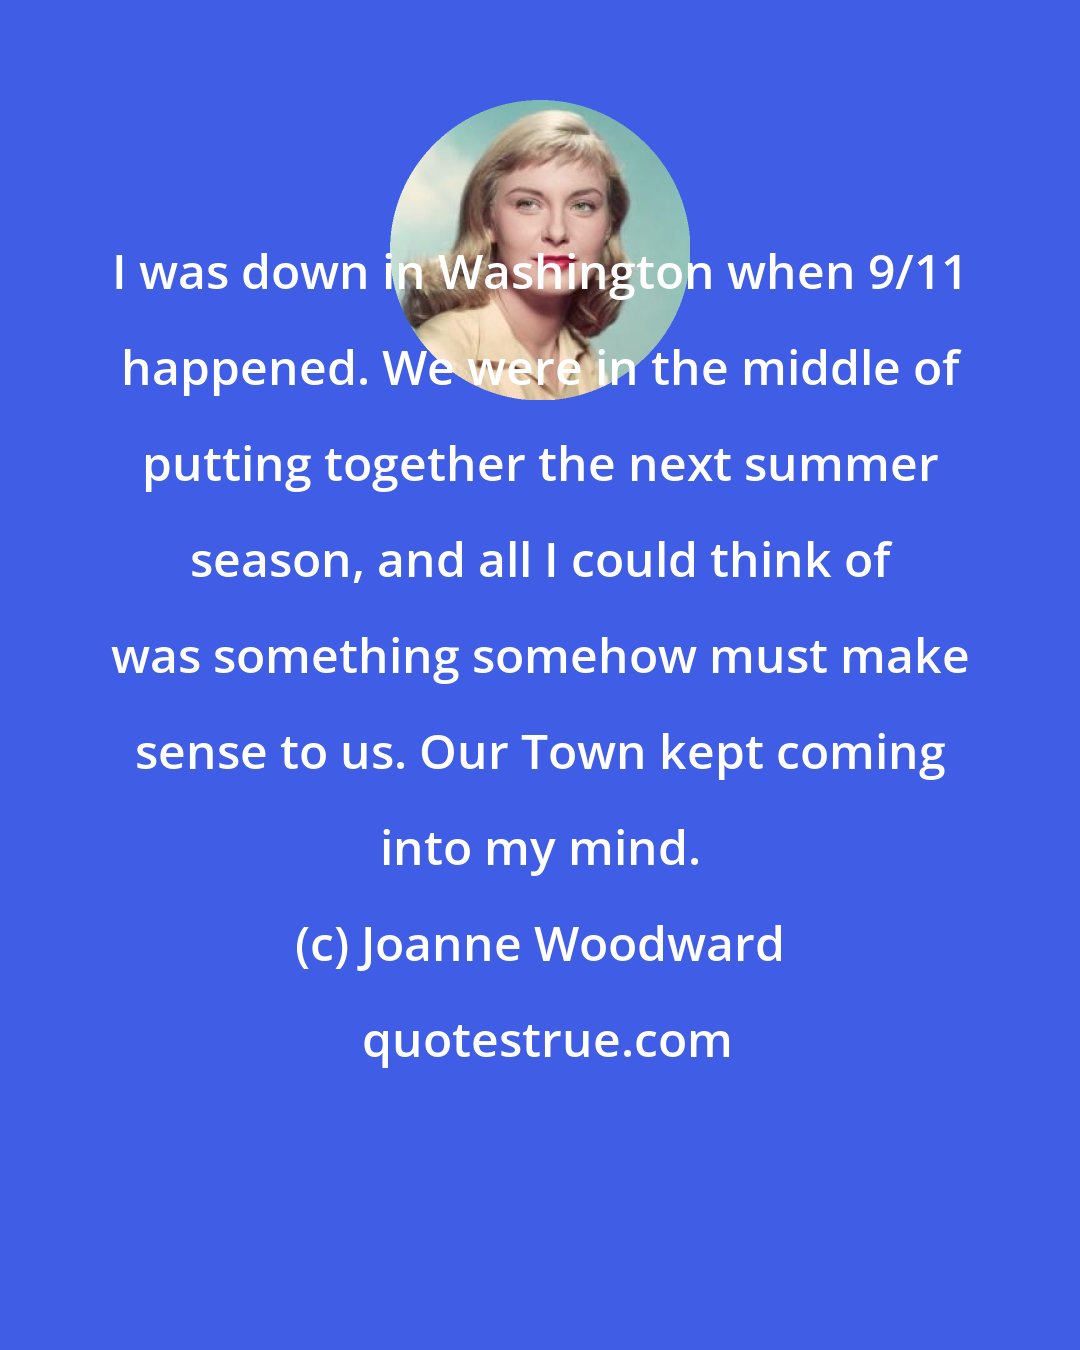 Joanne Woodward: I was down in Washington when 9/11 happened. We were in the middle of putting together the next summer season, and all I could think of was something somehow must make sense to us. Our Town kept coming into my mind.